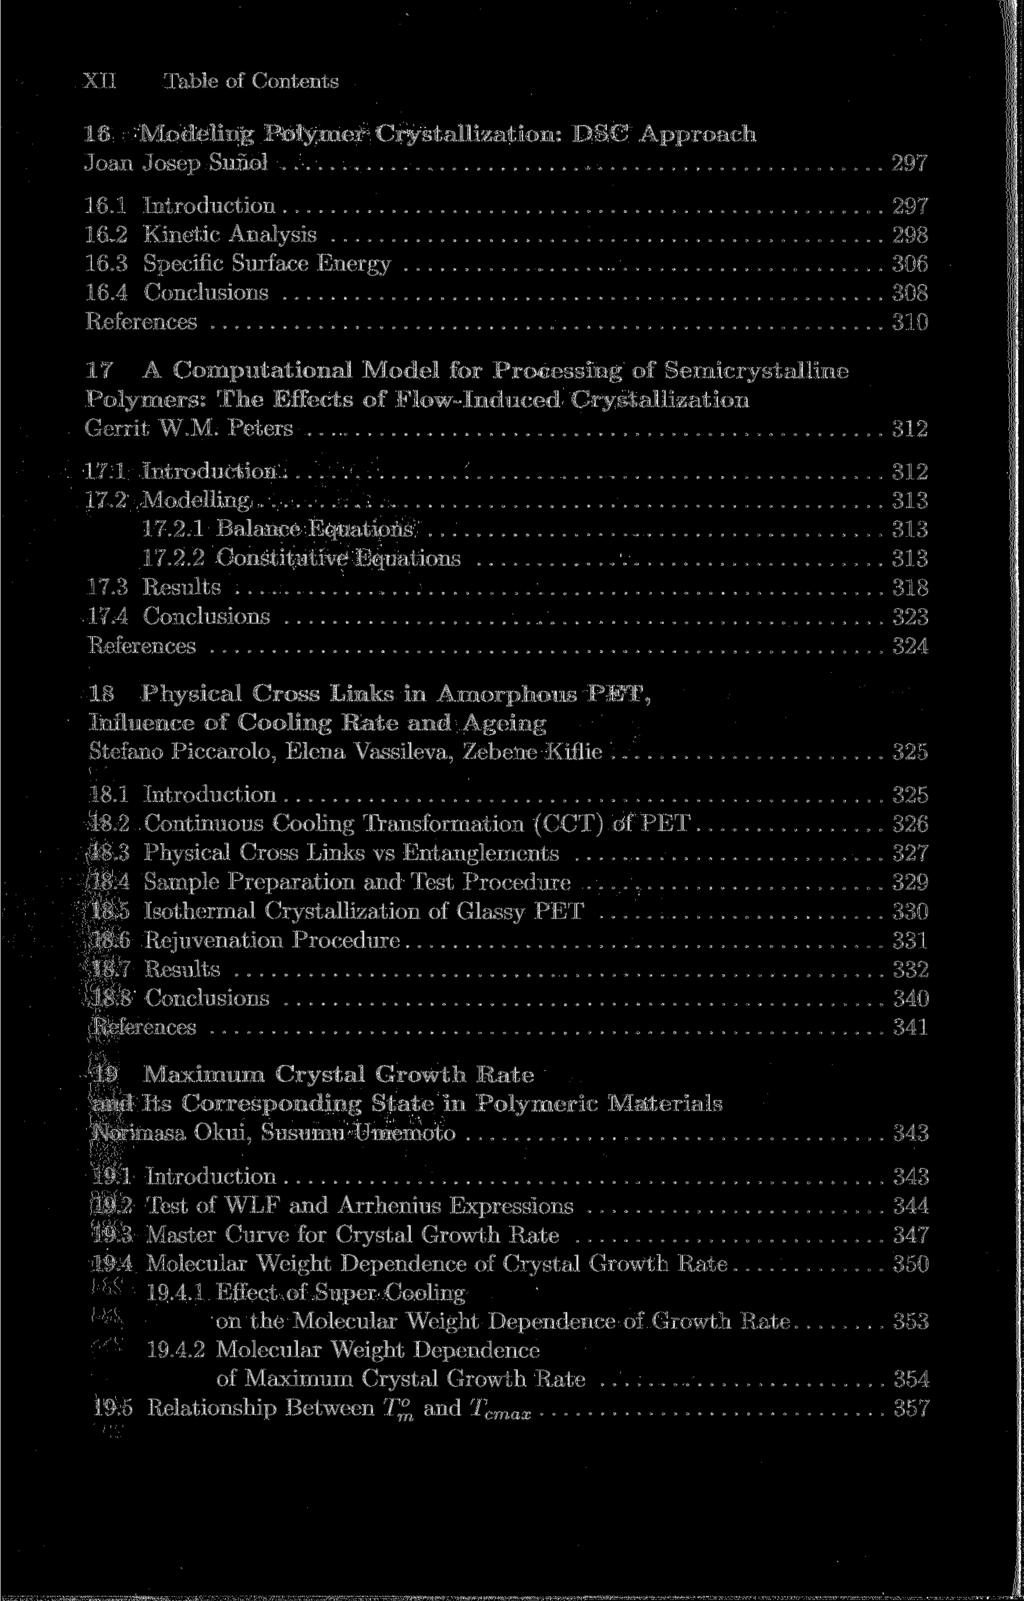 XII Table of Contents 16 Modeling Polymer Crystallization: DSC Approach Joan Josep Sufiol 297 16.1 Introduction 297 16.2 Kinetic Analysis 298 16.3 Specific Surface Energy 306 16.